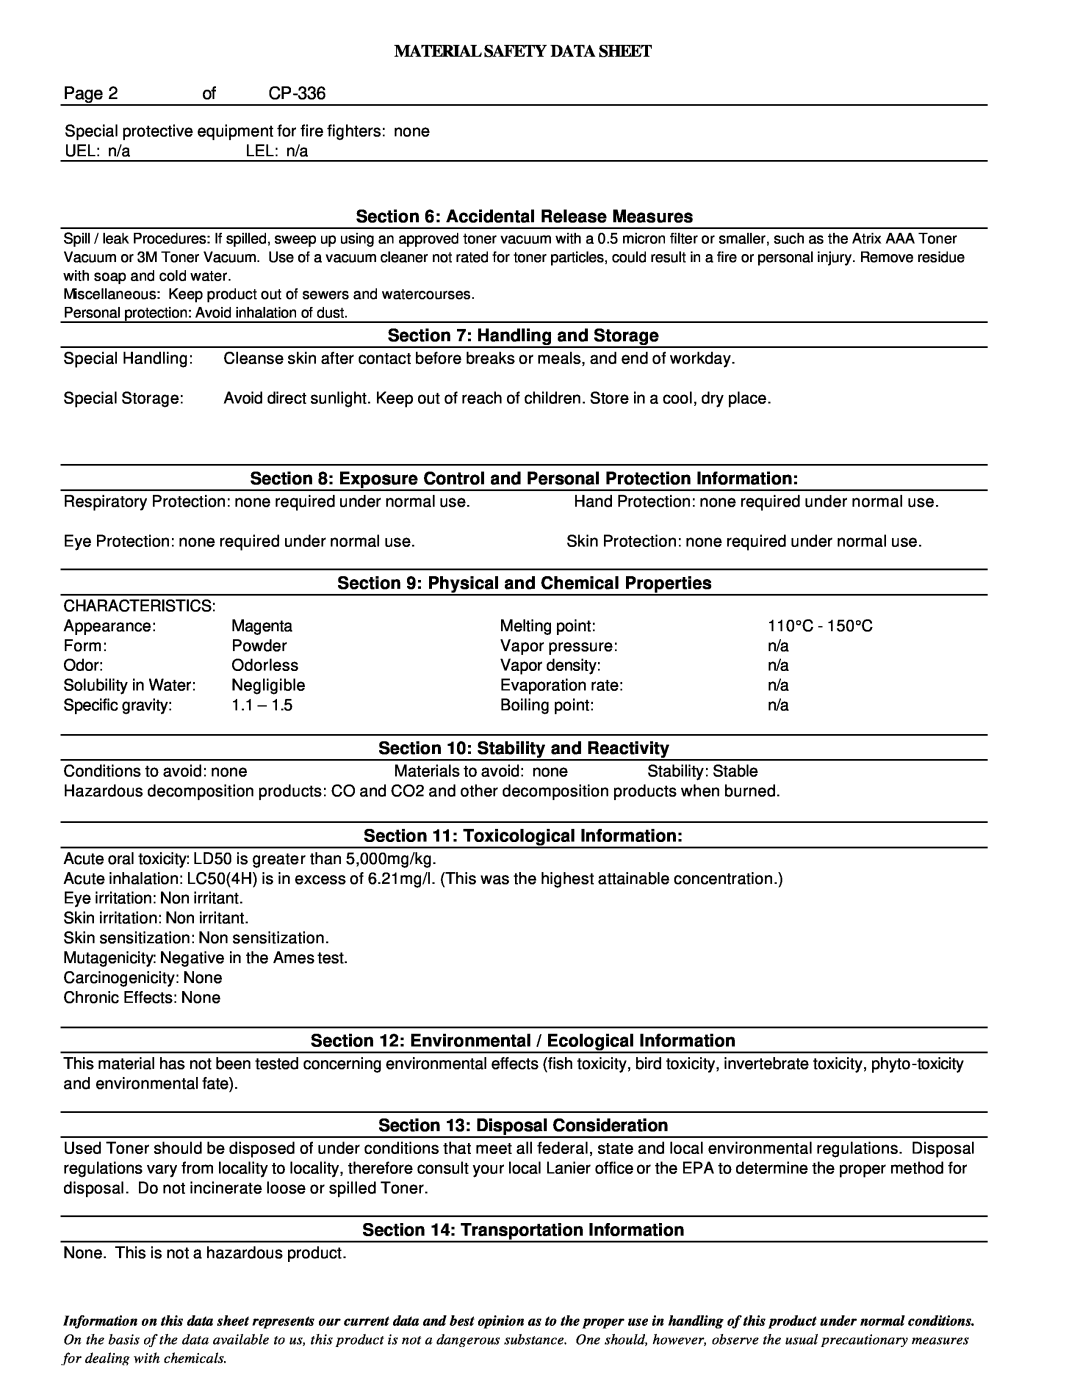 Lanier 5722 manual Material Safety Data Sheet, Page 2of CP-336, Accidental Release Measures, Handling and Storage 